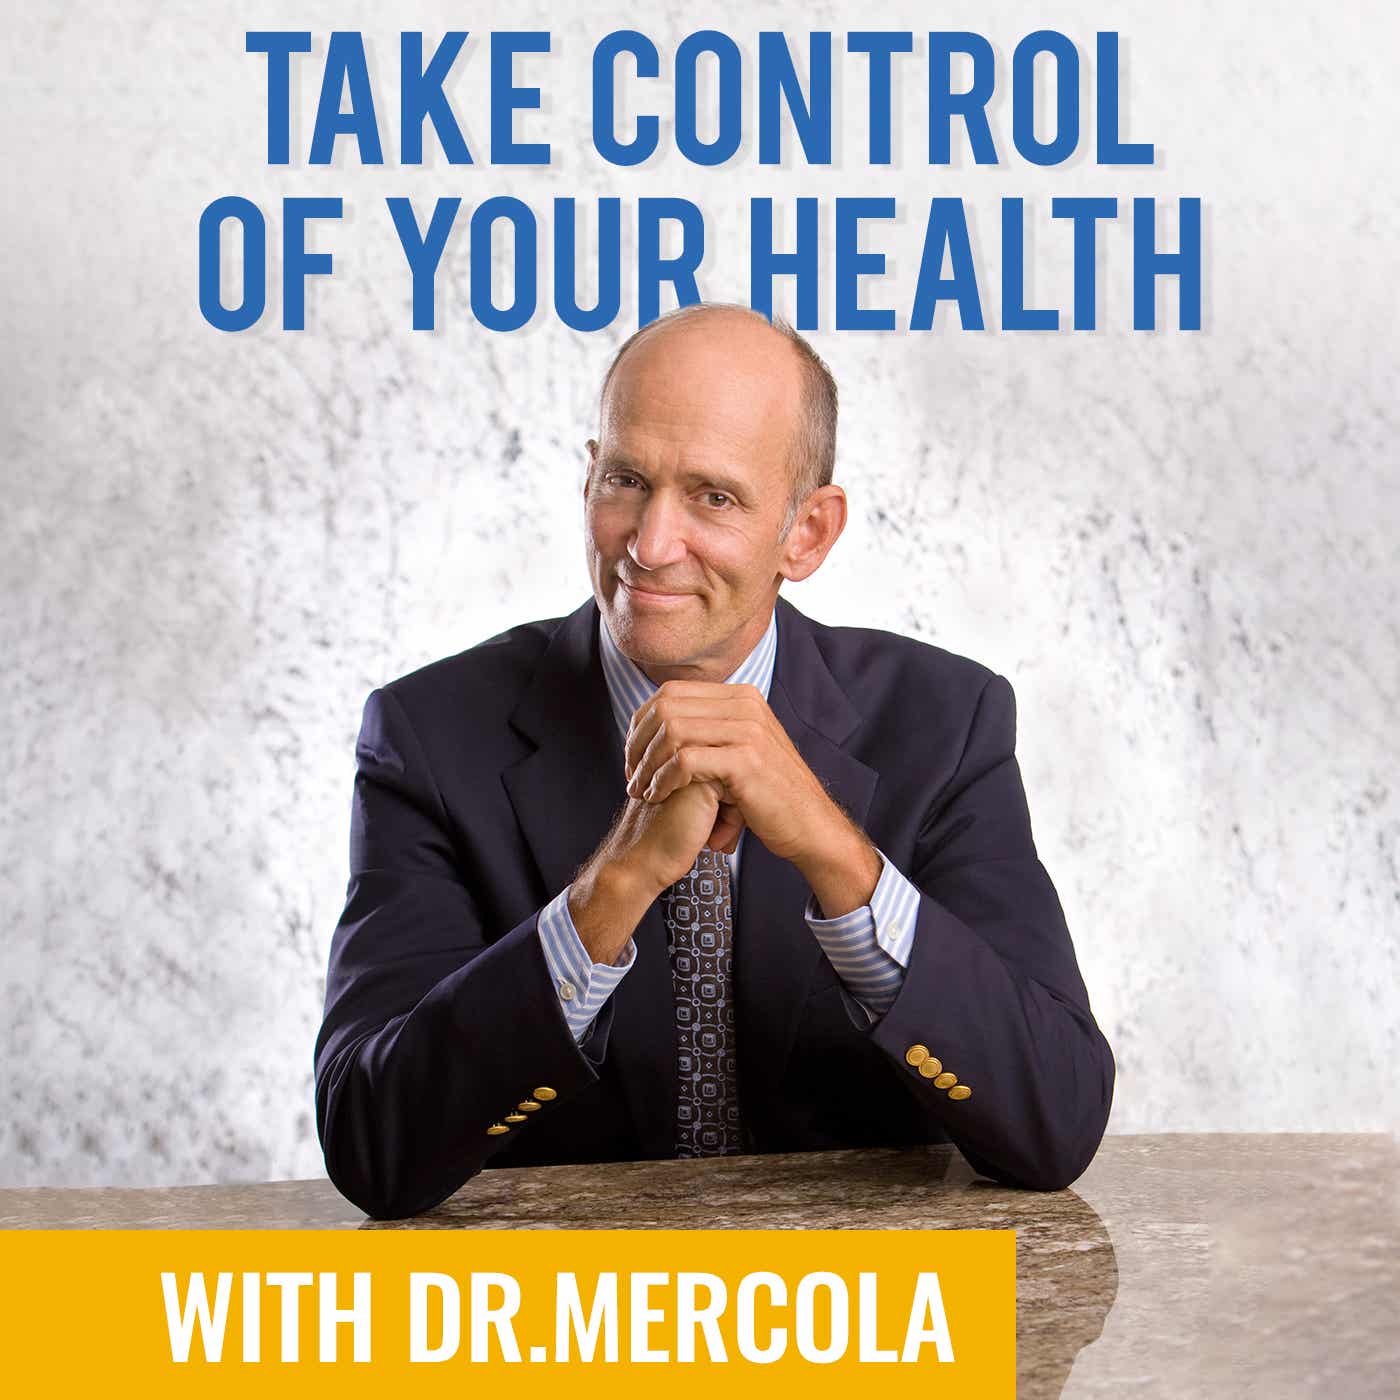 Dr. Joseph Mercola - Take Control of Your Health (private feed for leelar1961@gmail.com)